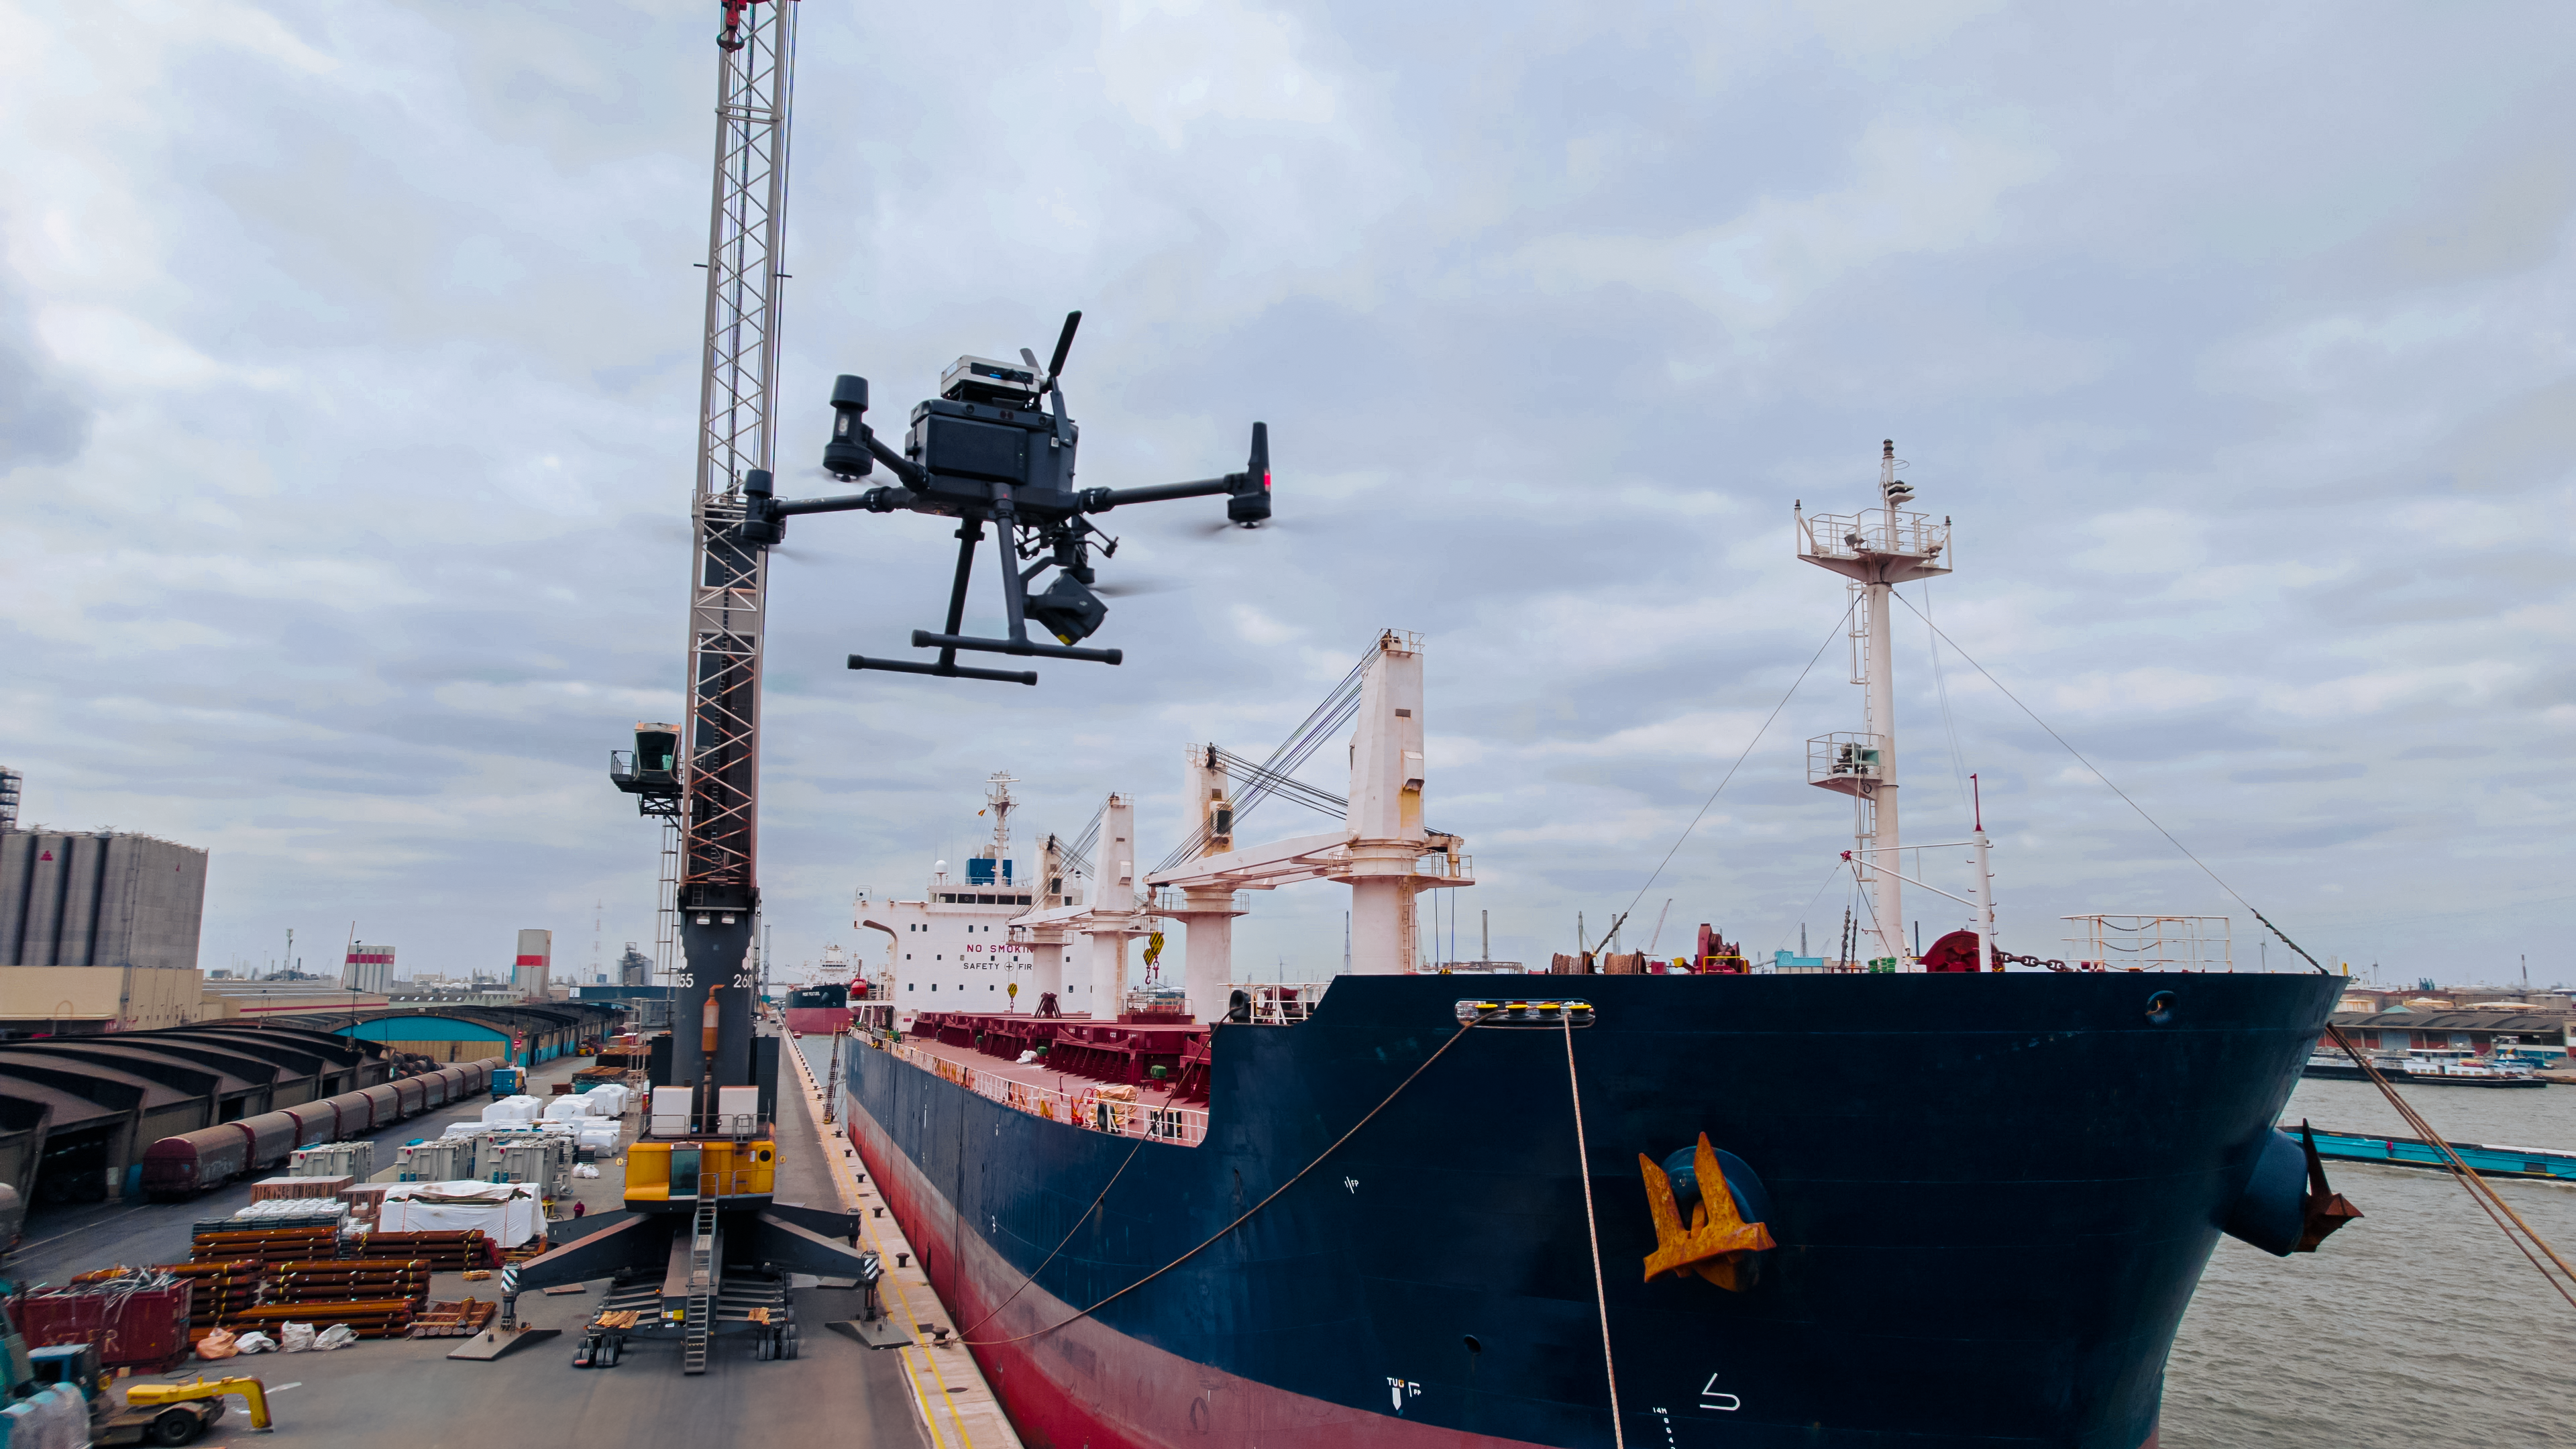 5G-Connected Drones Promise Better Security image